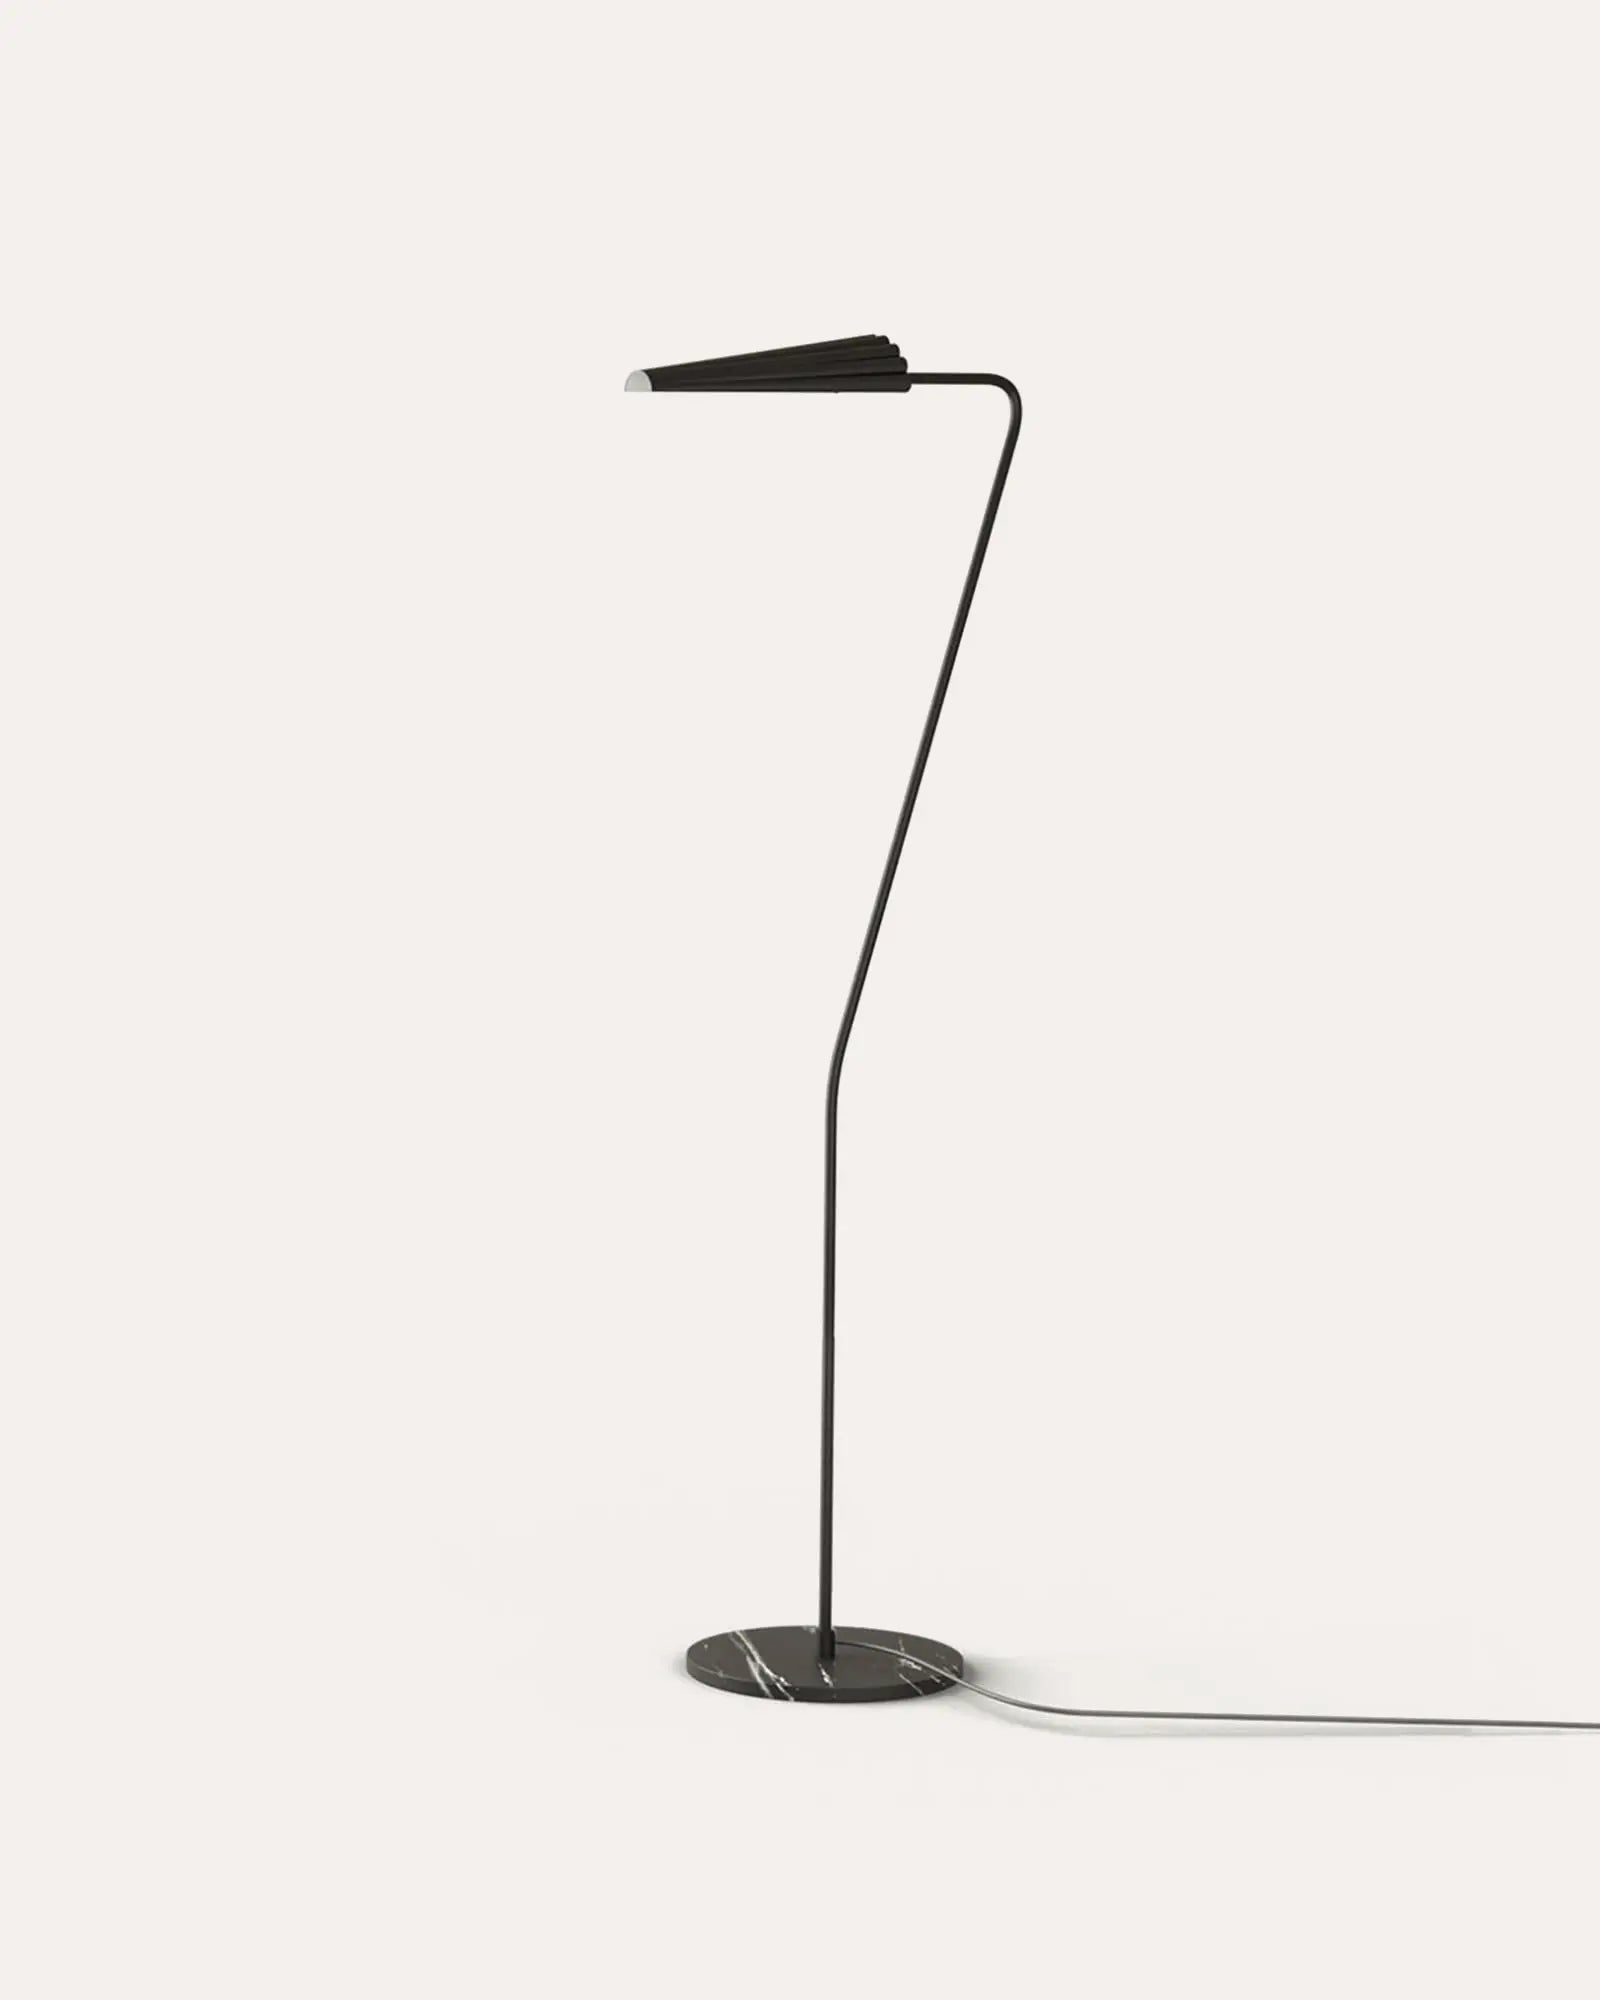 Bion contemporary floor lamp with corrugated steel shade black stem